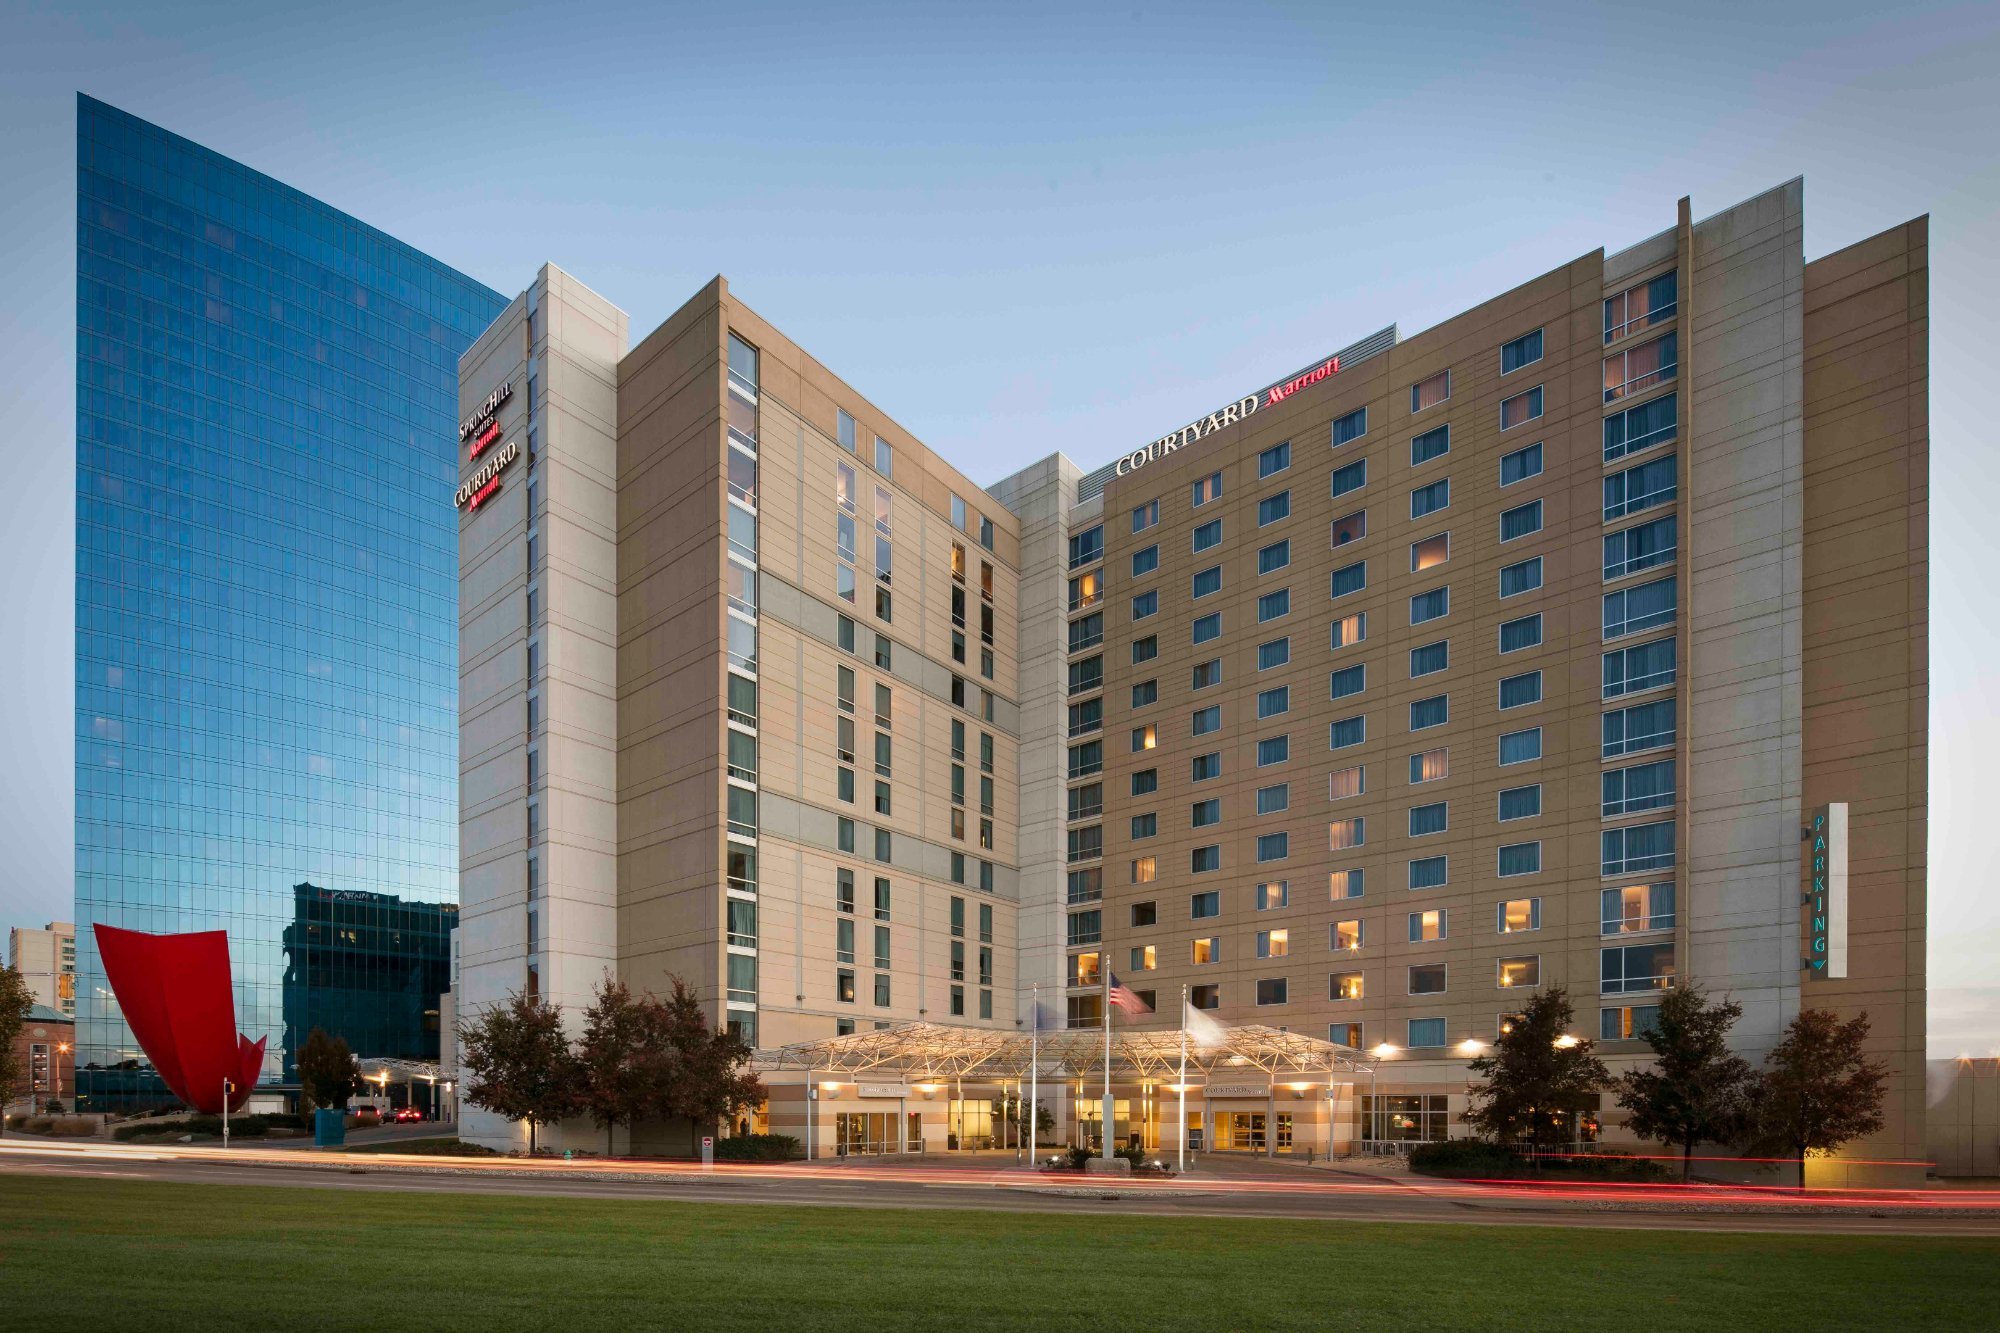 Photo of Courtyard by Marriott Indianapolis Downtown, Indianapolis, IN